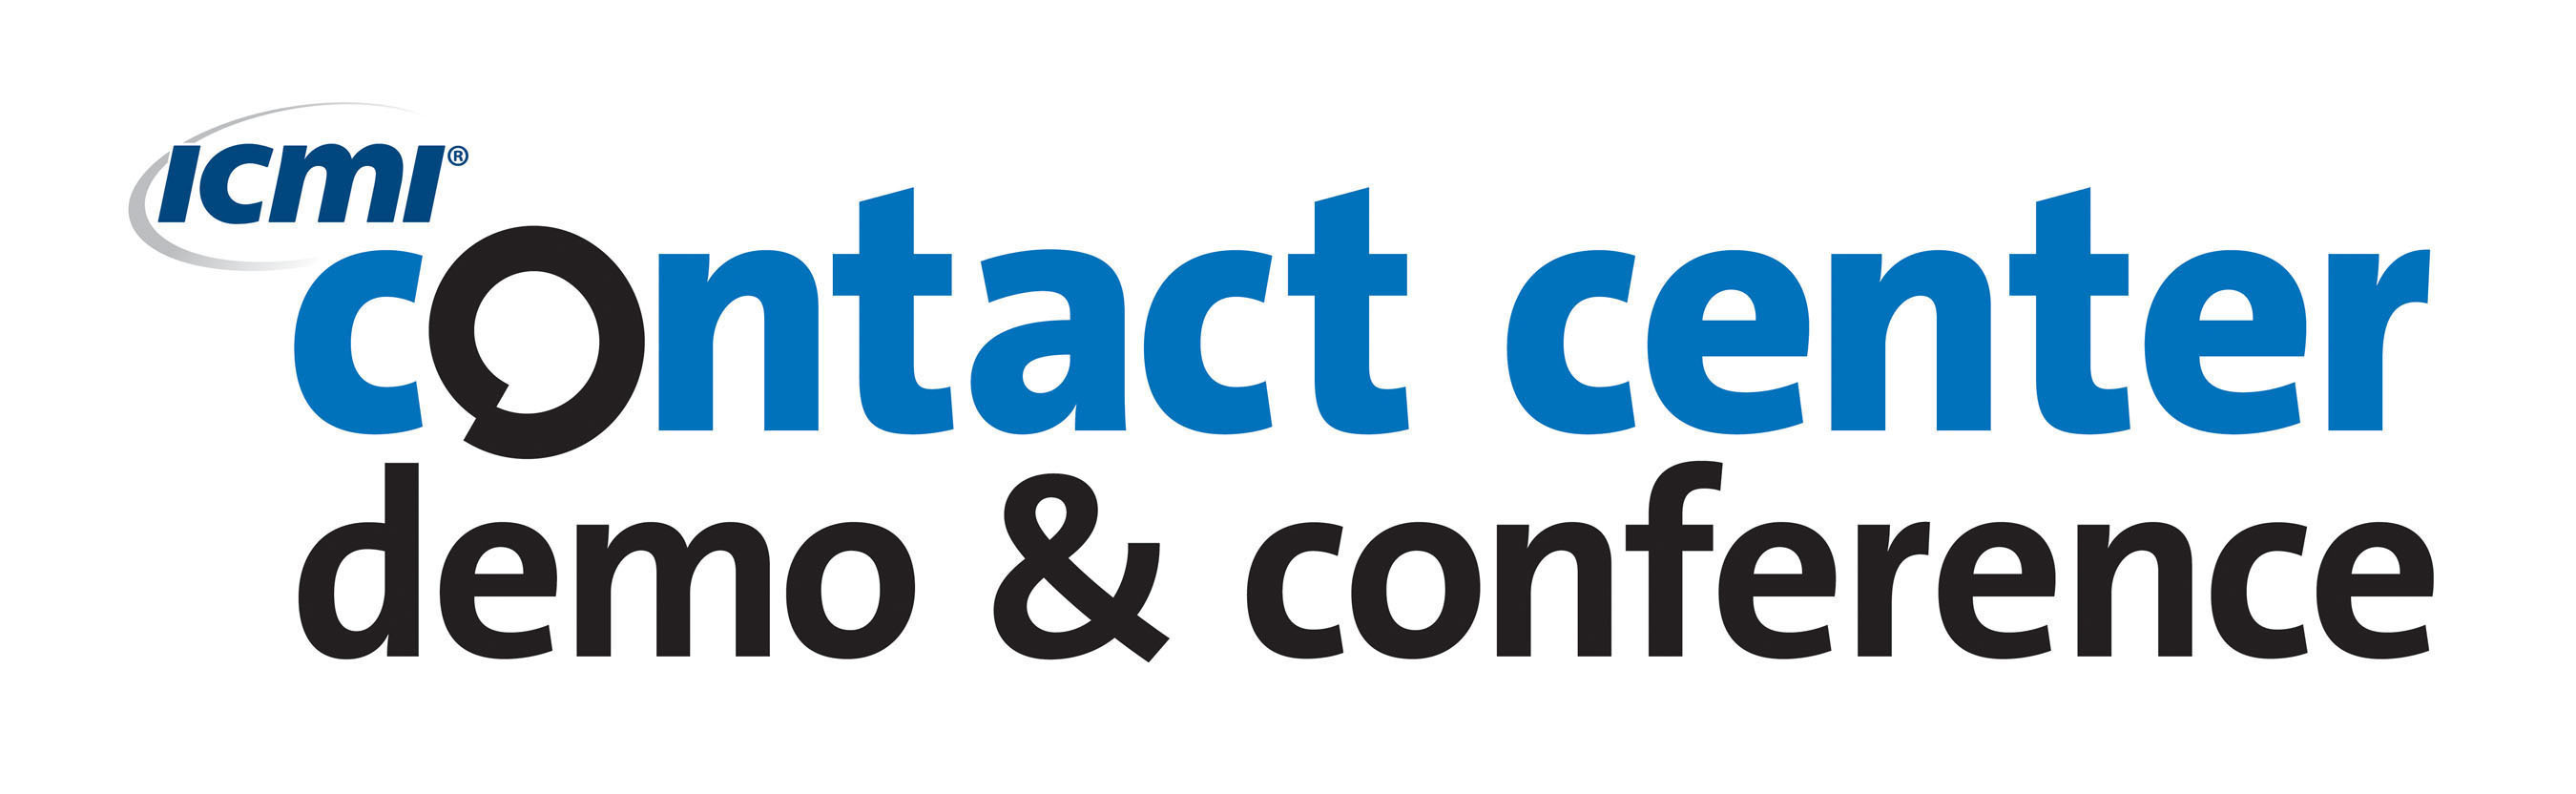 The 2015 Contact Center Demo & Conference will take place October 19-21, 2015, at the Rio in Las Vegas, Nevada.